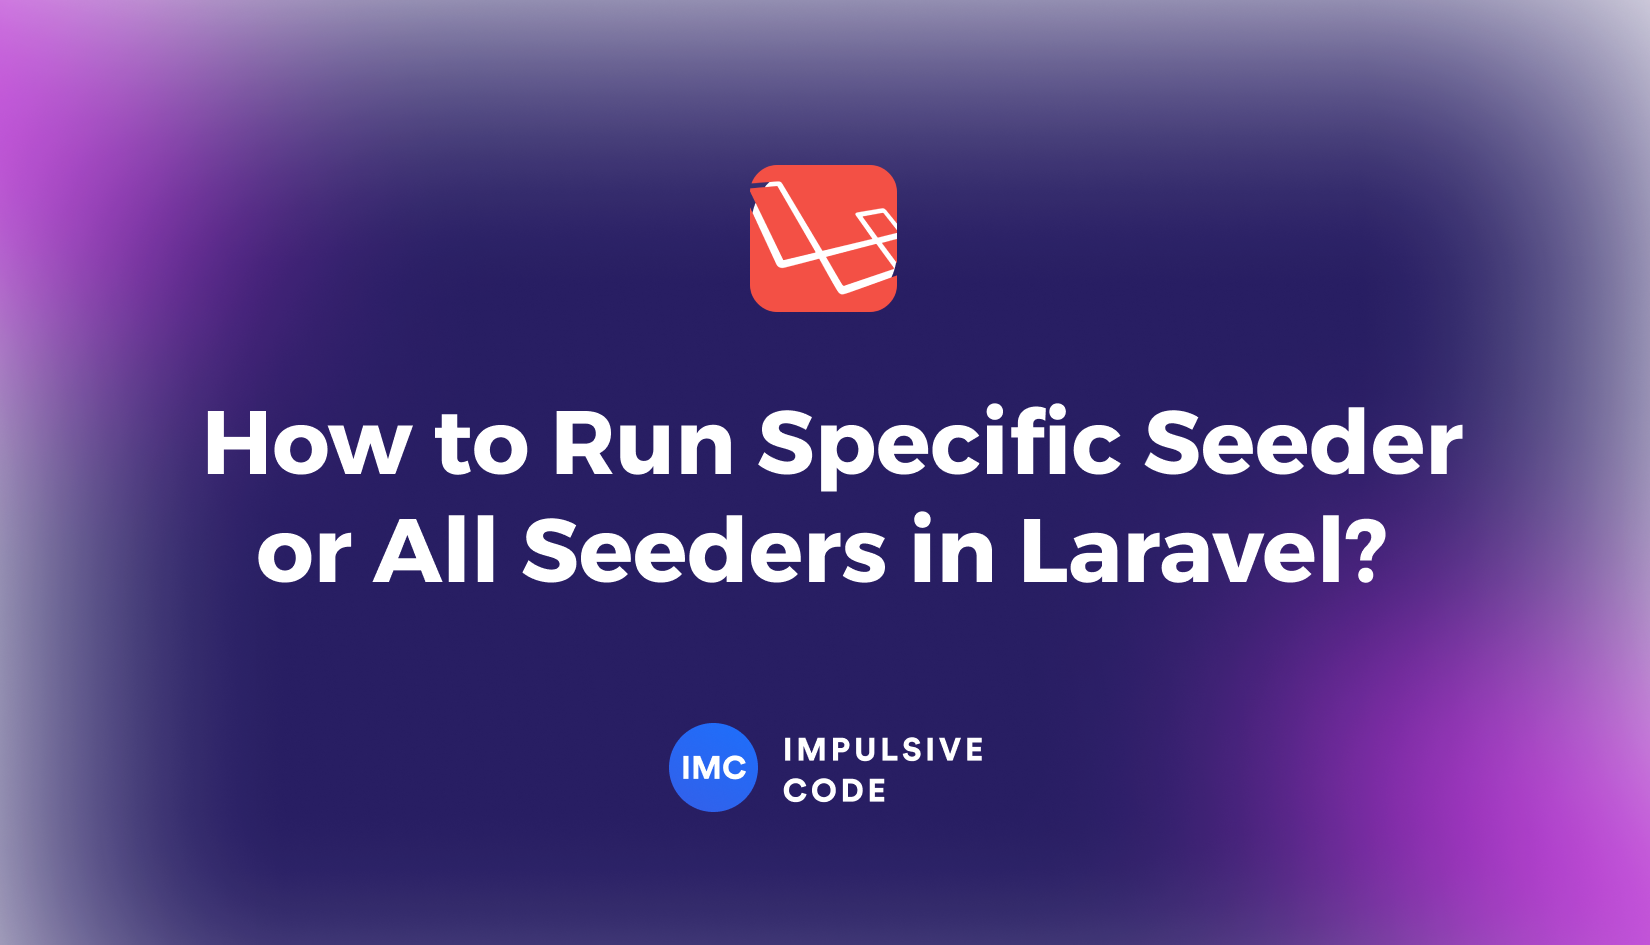 How to Run Specific Seeder or All Seeders in Laravel?